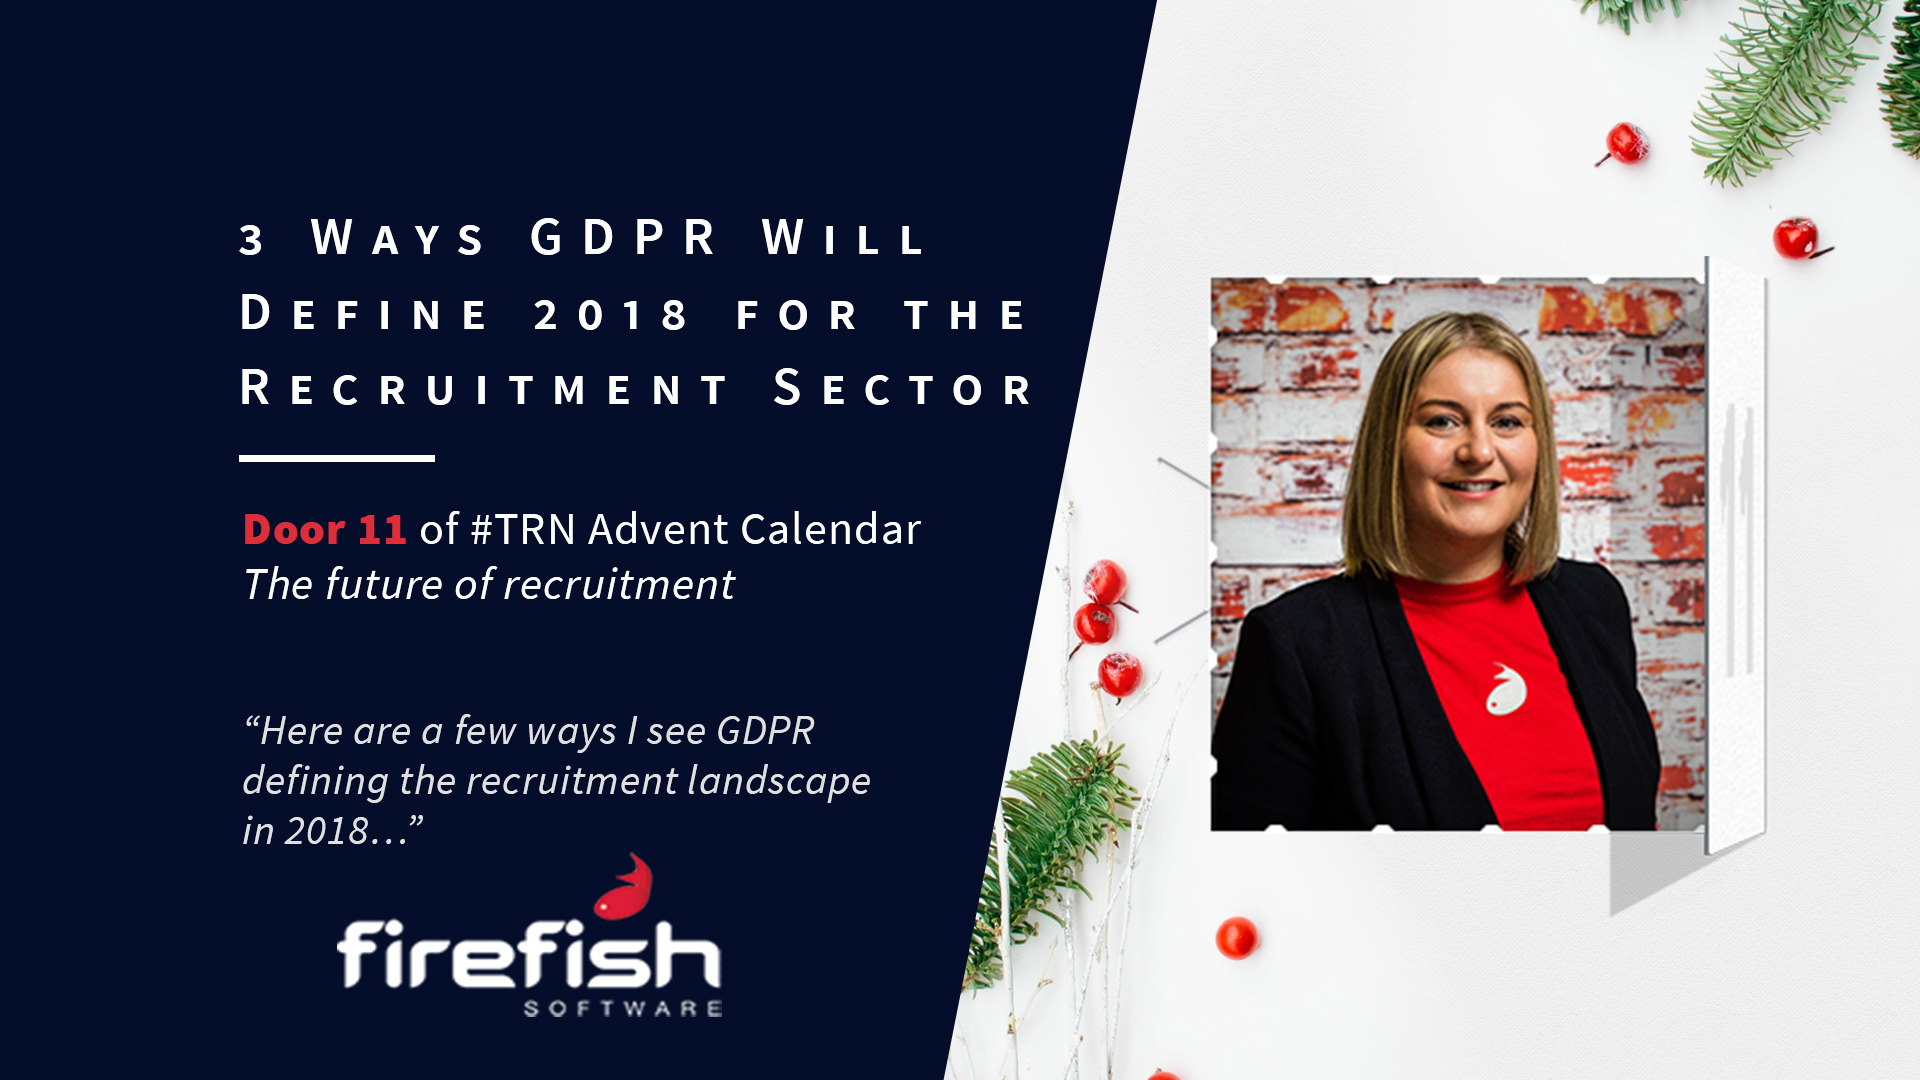 3 Ways GDPR Will Define 2018 for the Recruitment Sector with Wendy McDougall